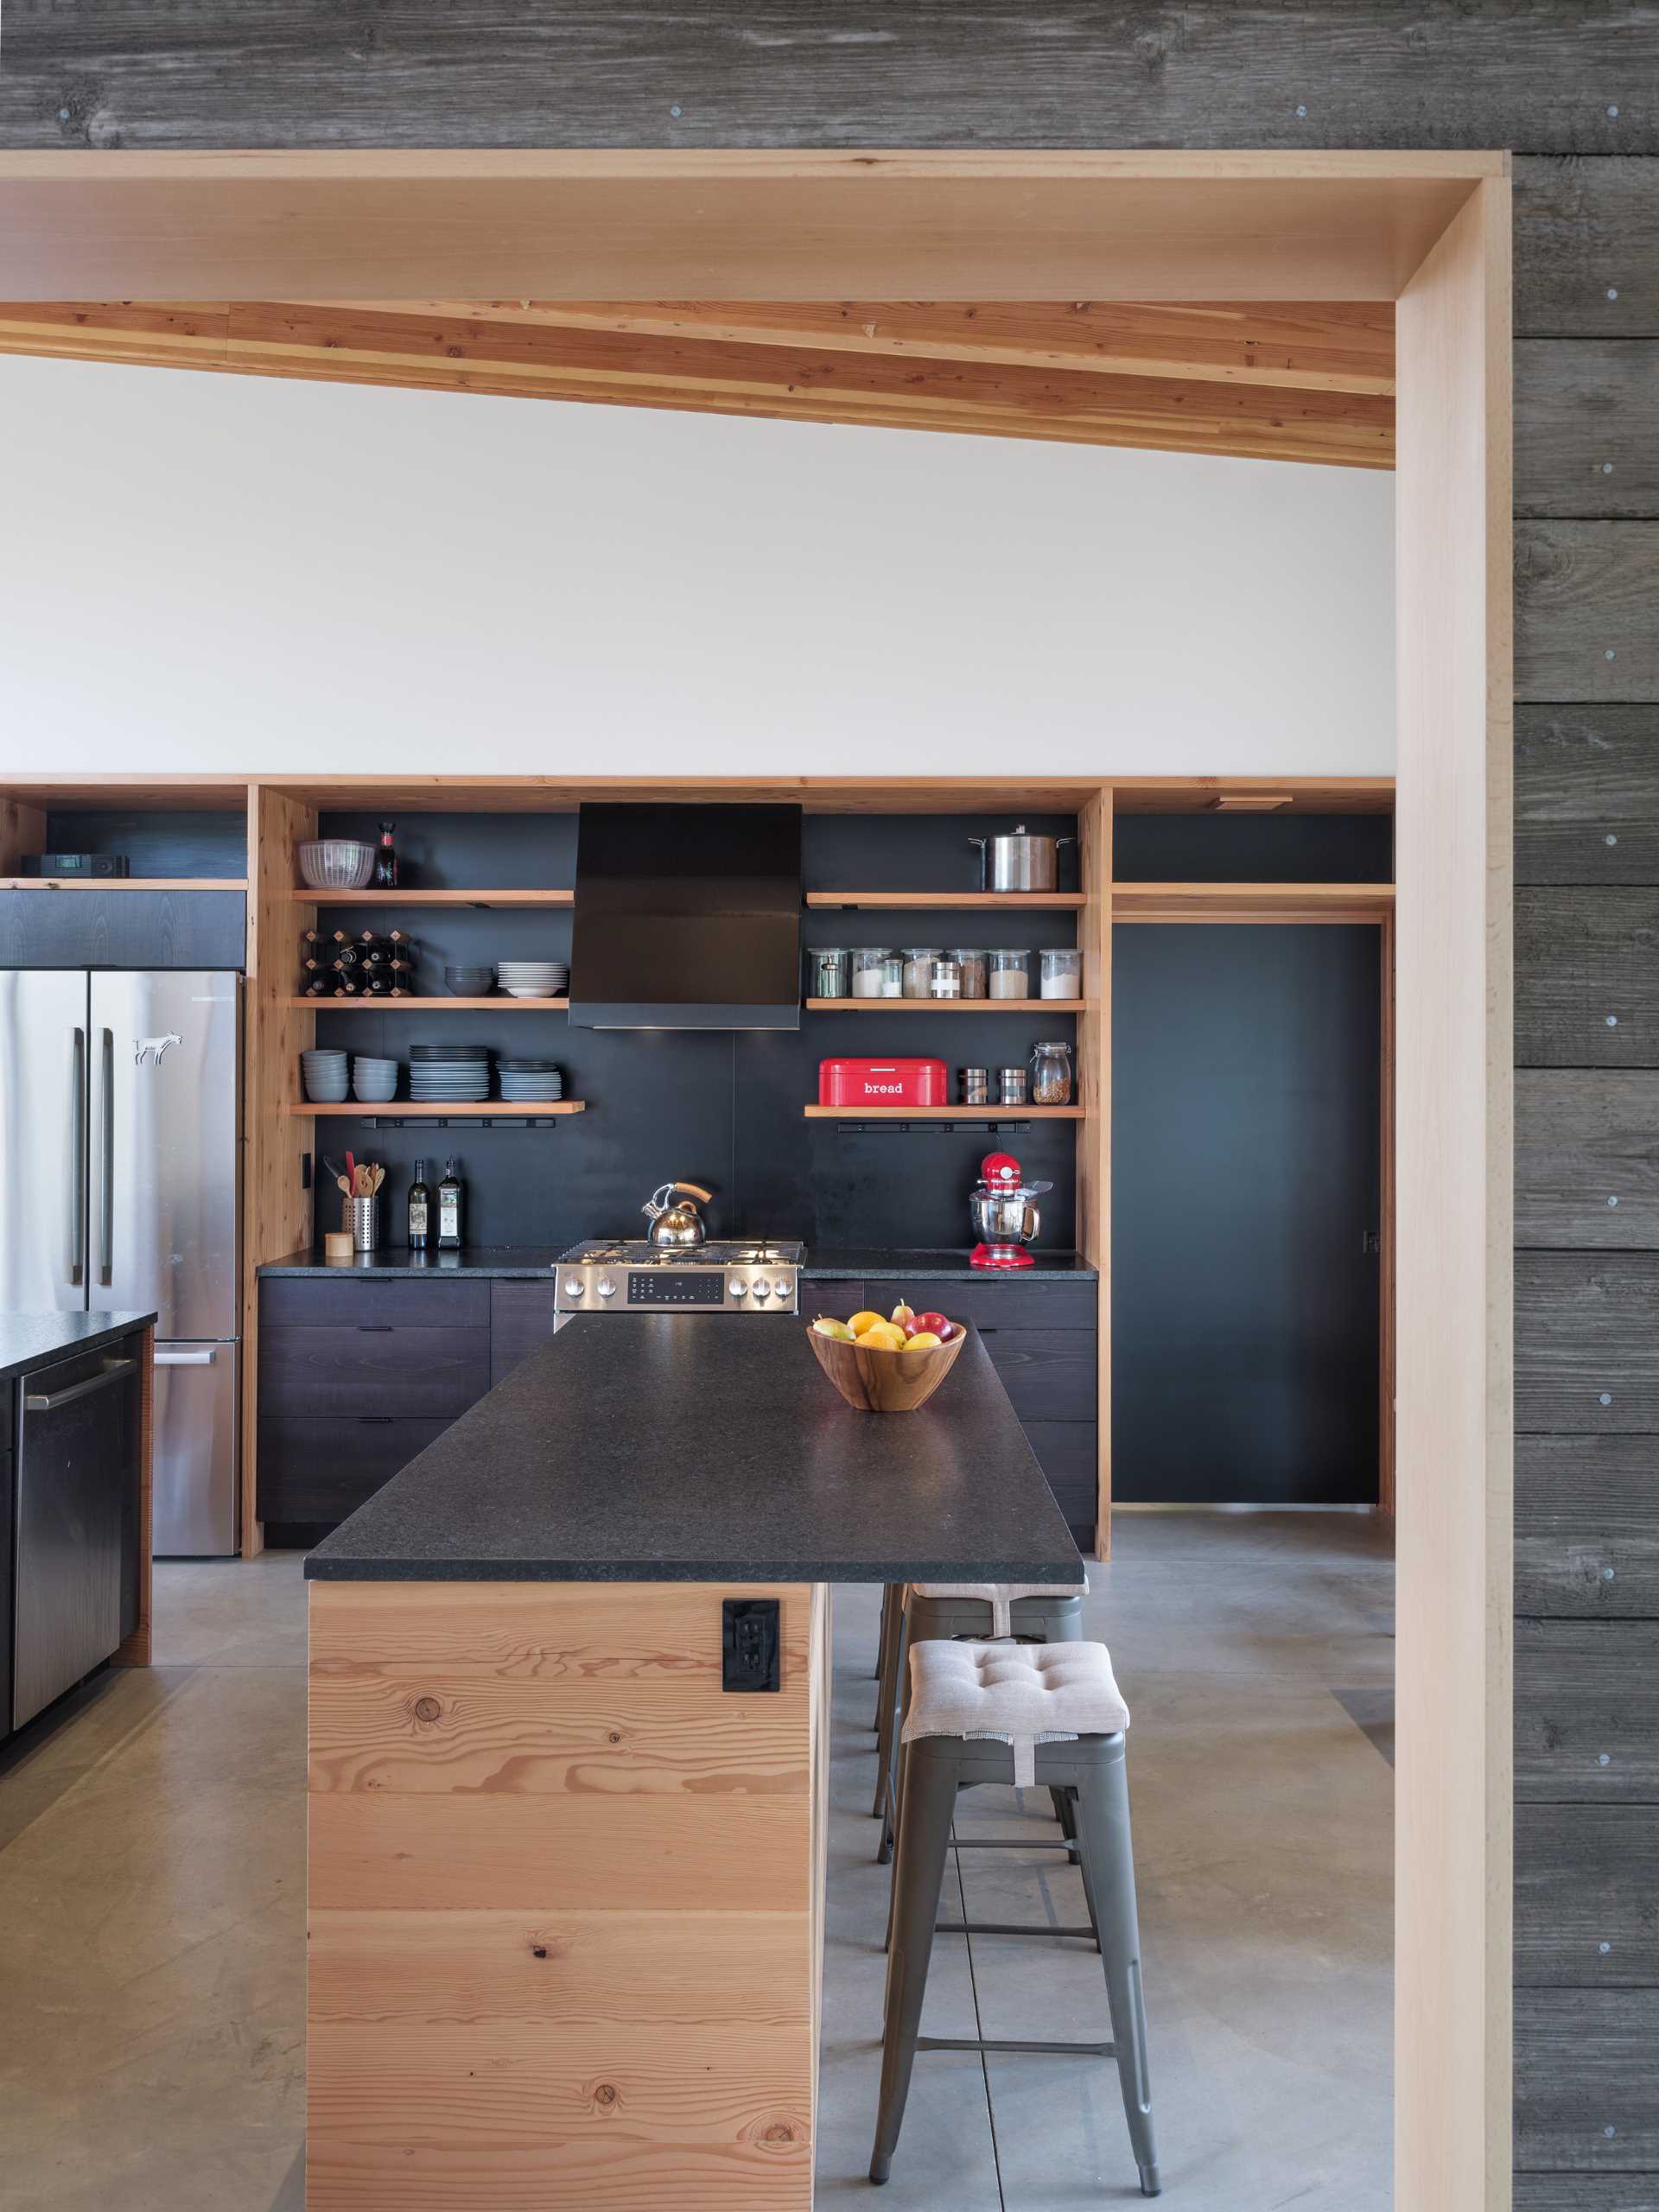 In this kitchen, dark, leathered granite countertops give a crispness to salvaged wood cabinets, which are cleverly positioned to create a room divider and storage.